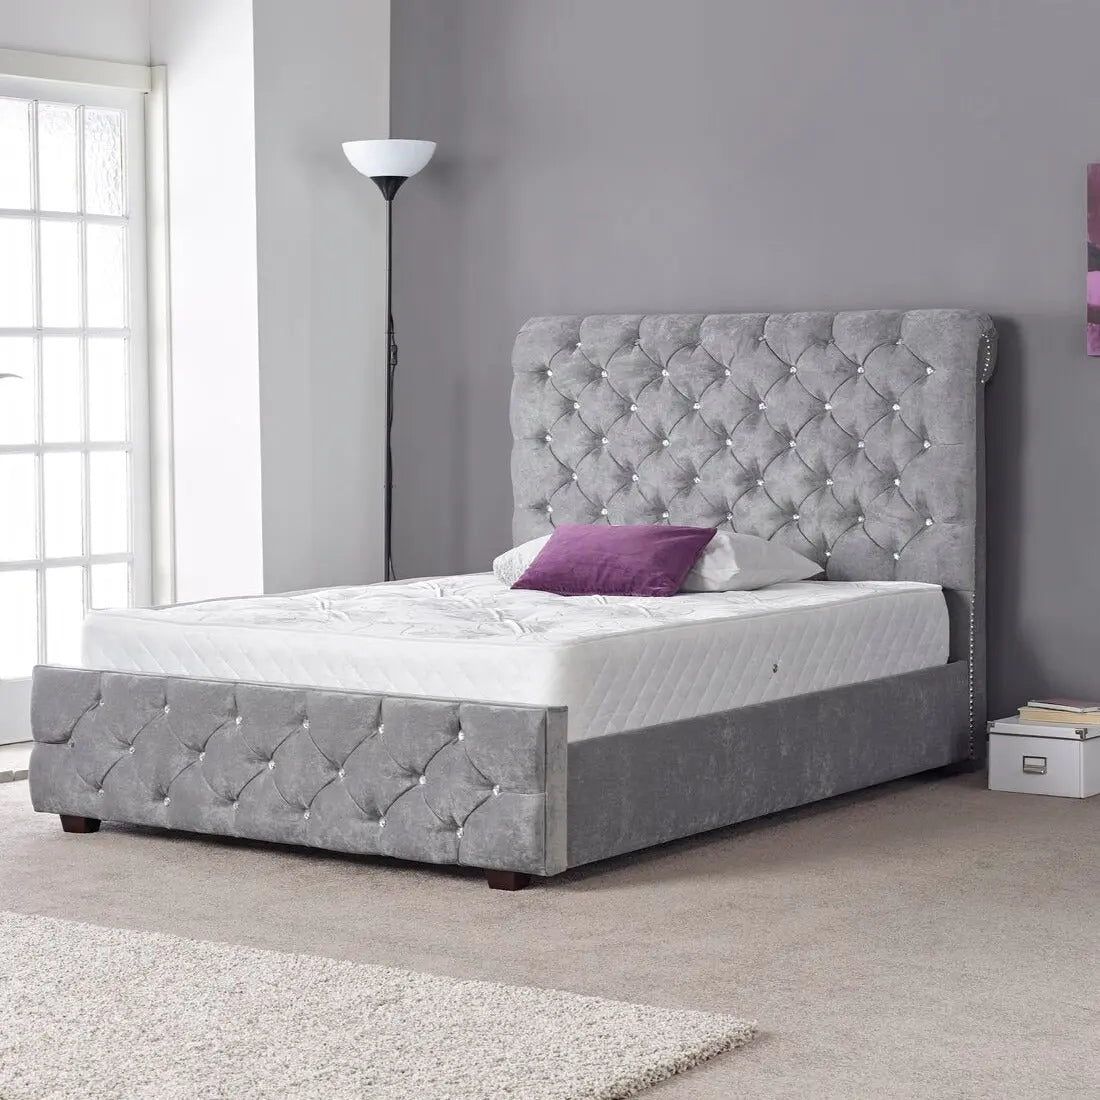 Ainsley Upholstered Sleigh Bed Britainsleep